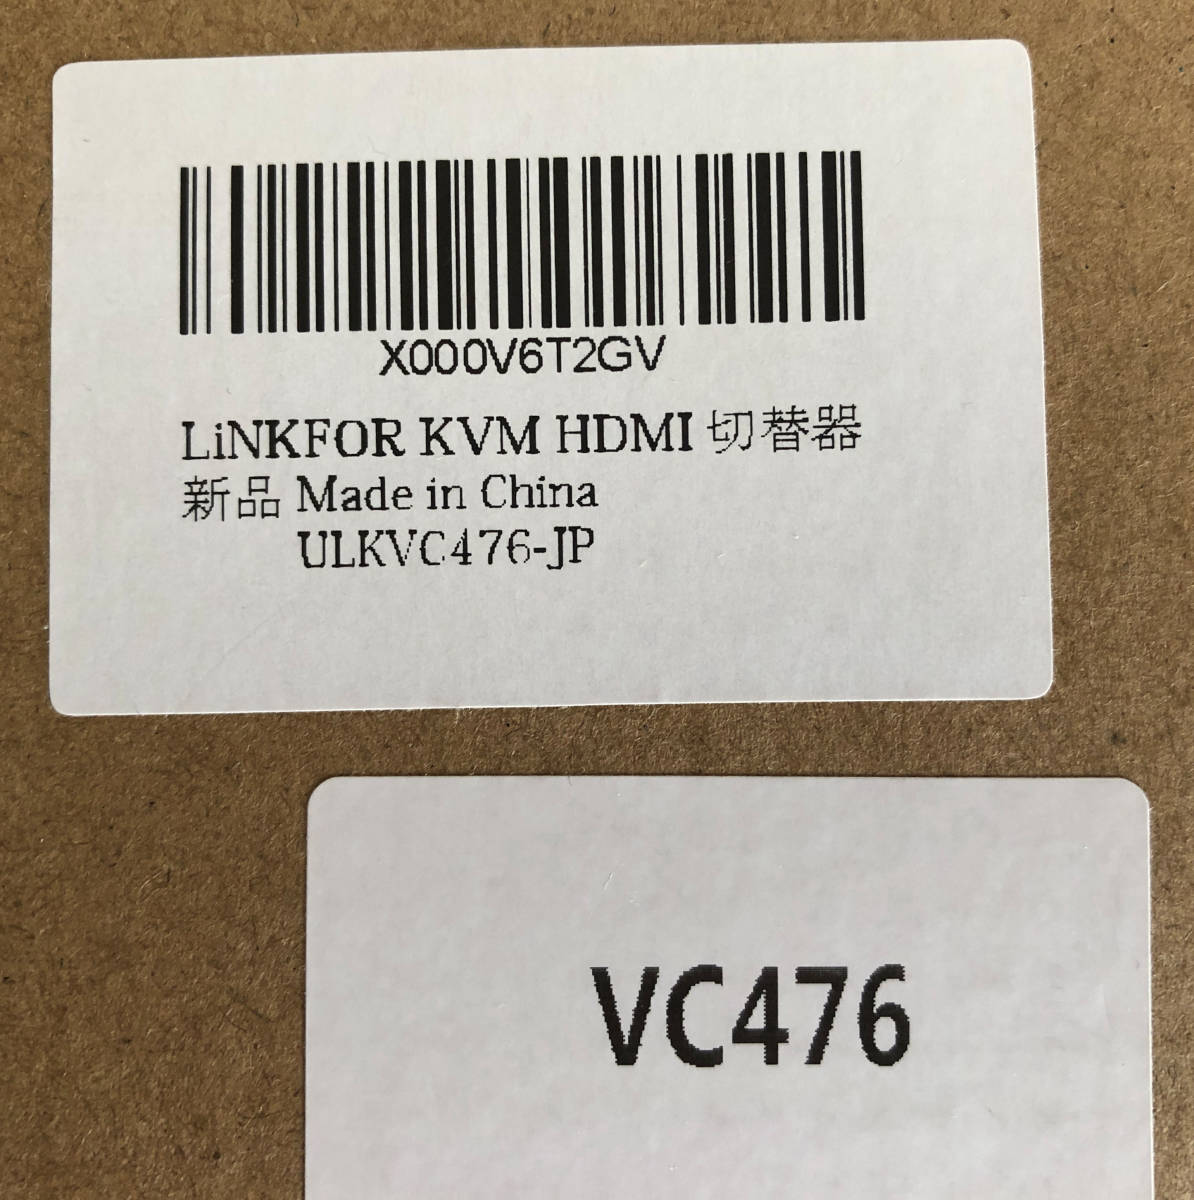 LiNKFOR 2ポート USB HDMI パソコン切替器（PC 2台用）中古品